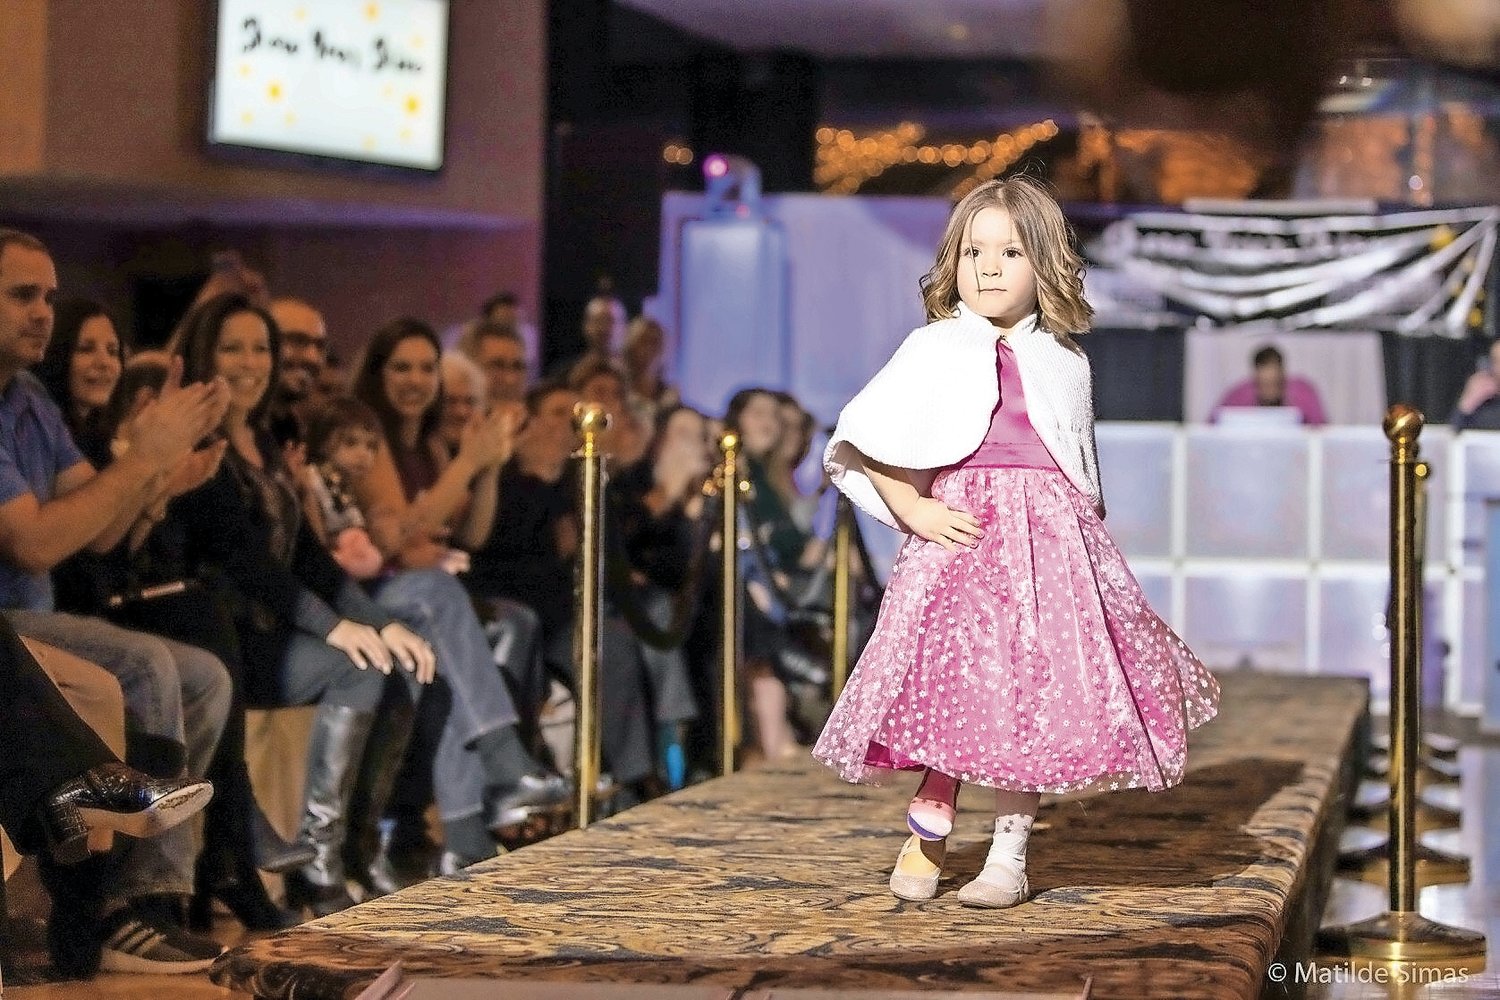 Aurora Browne, 5, of Newark Valley, N.Y., walked the runway at the “Show Your Shine” event in Oceanside on Jan. 11.